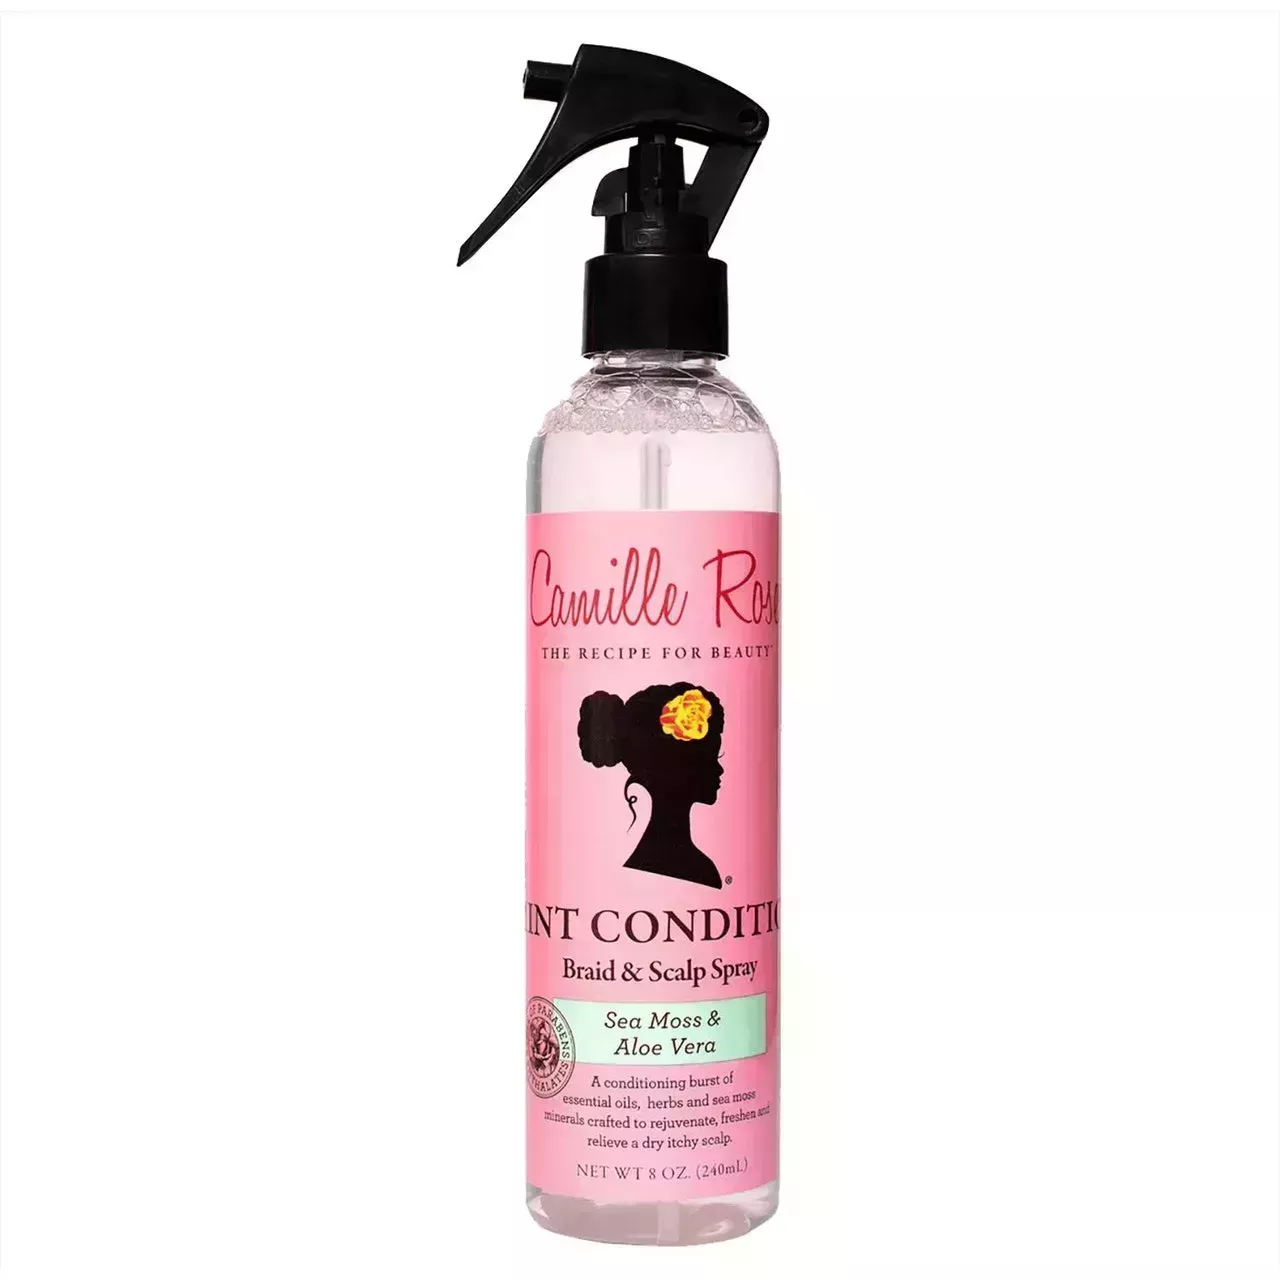 Camille Rose Mint Condition Braid & Scalp Spray bottle with pink label and black spray nozzle on white background